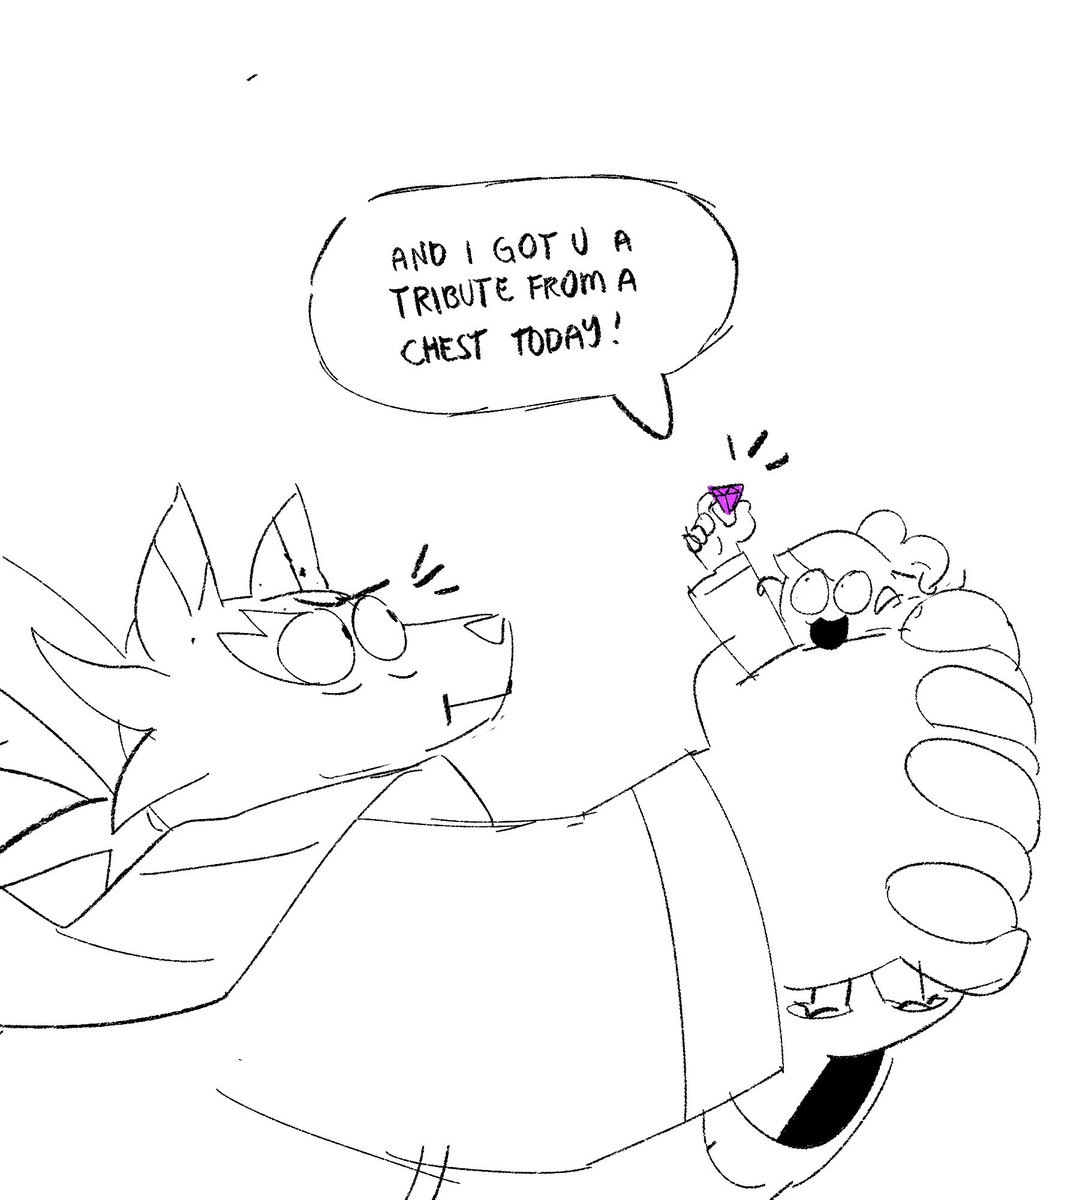 She likes to send her patron valuables for his hoard 